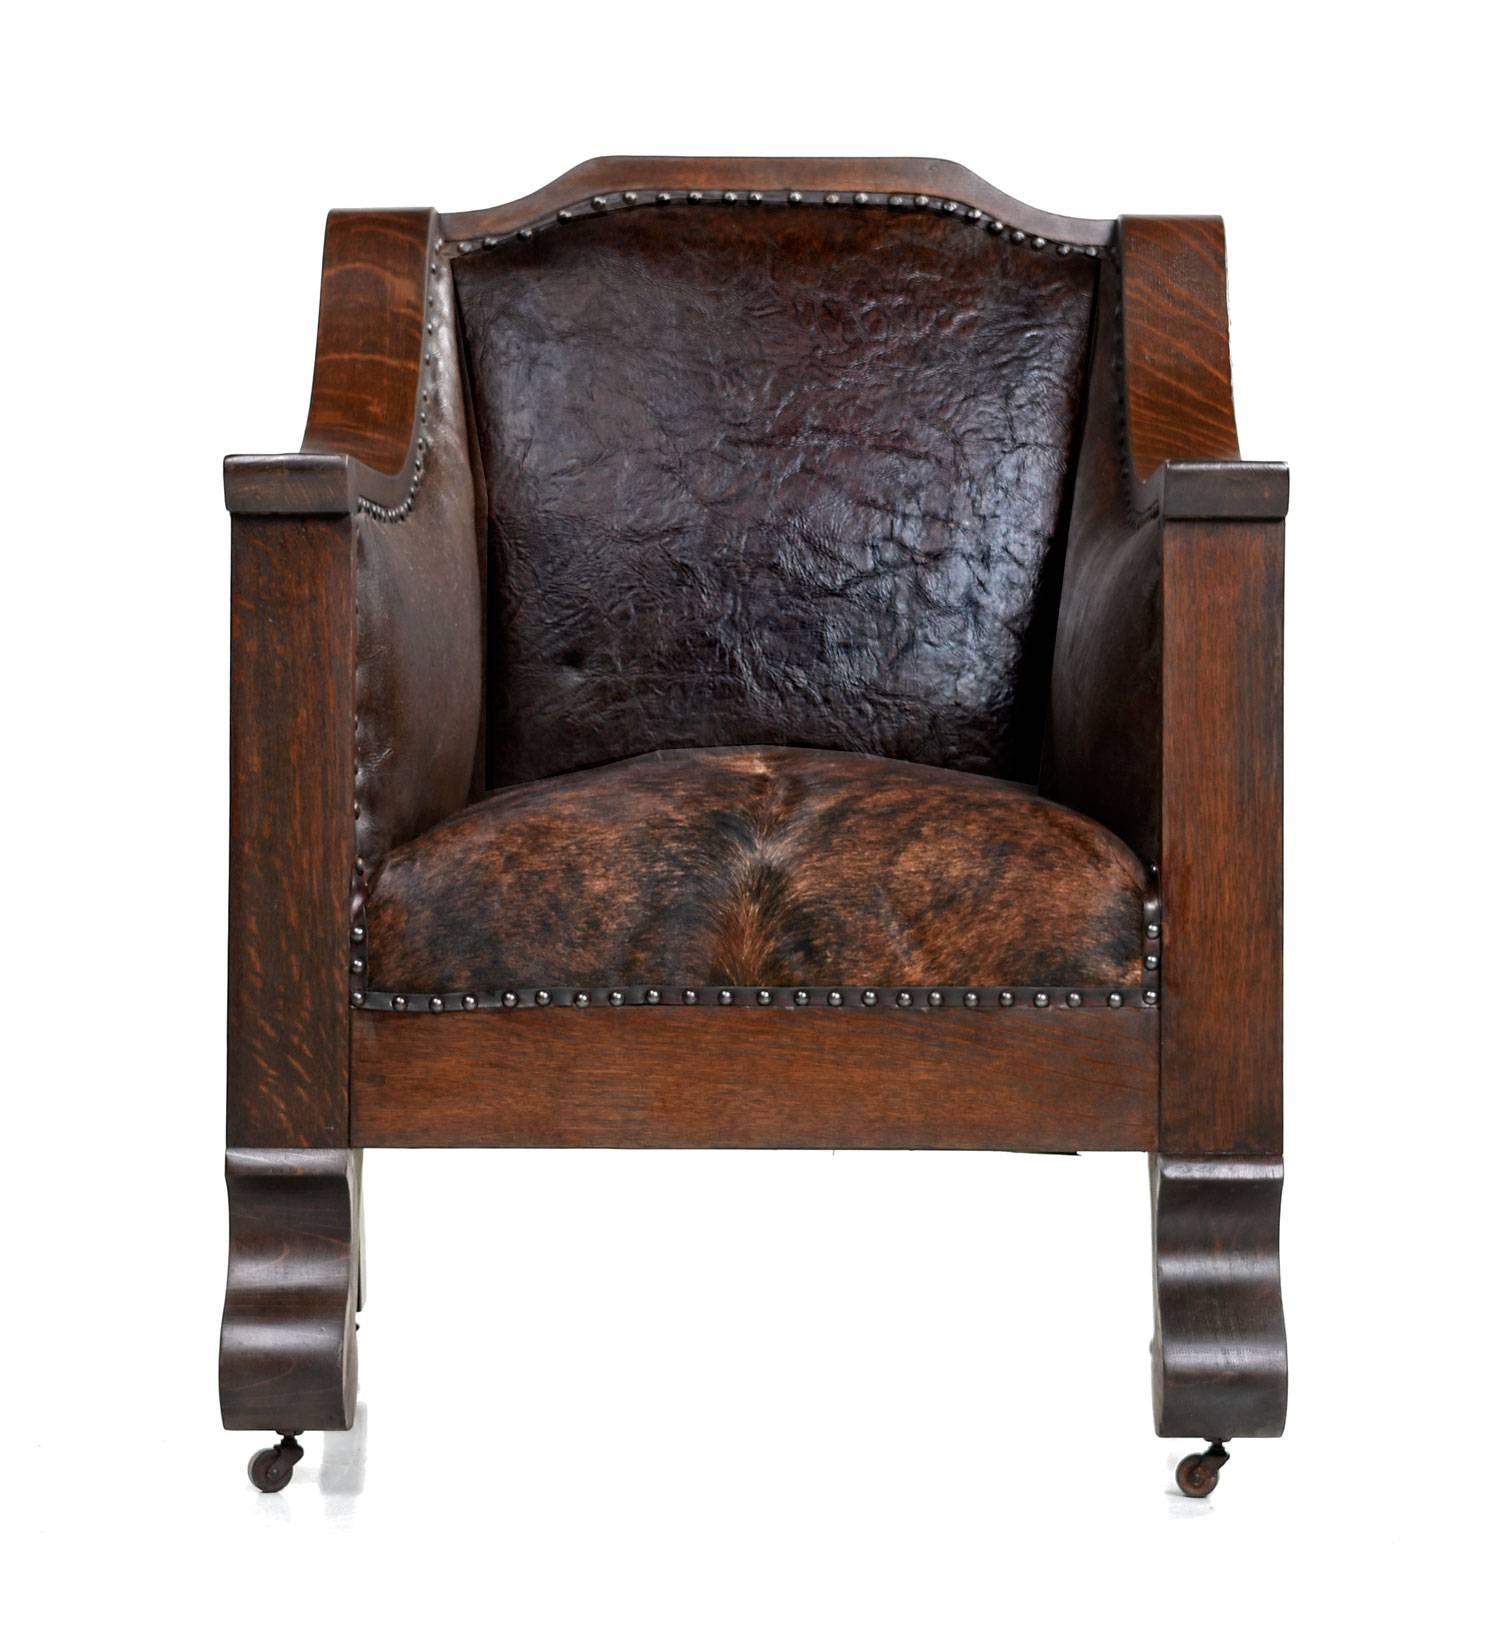 1800s chair